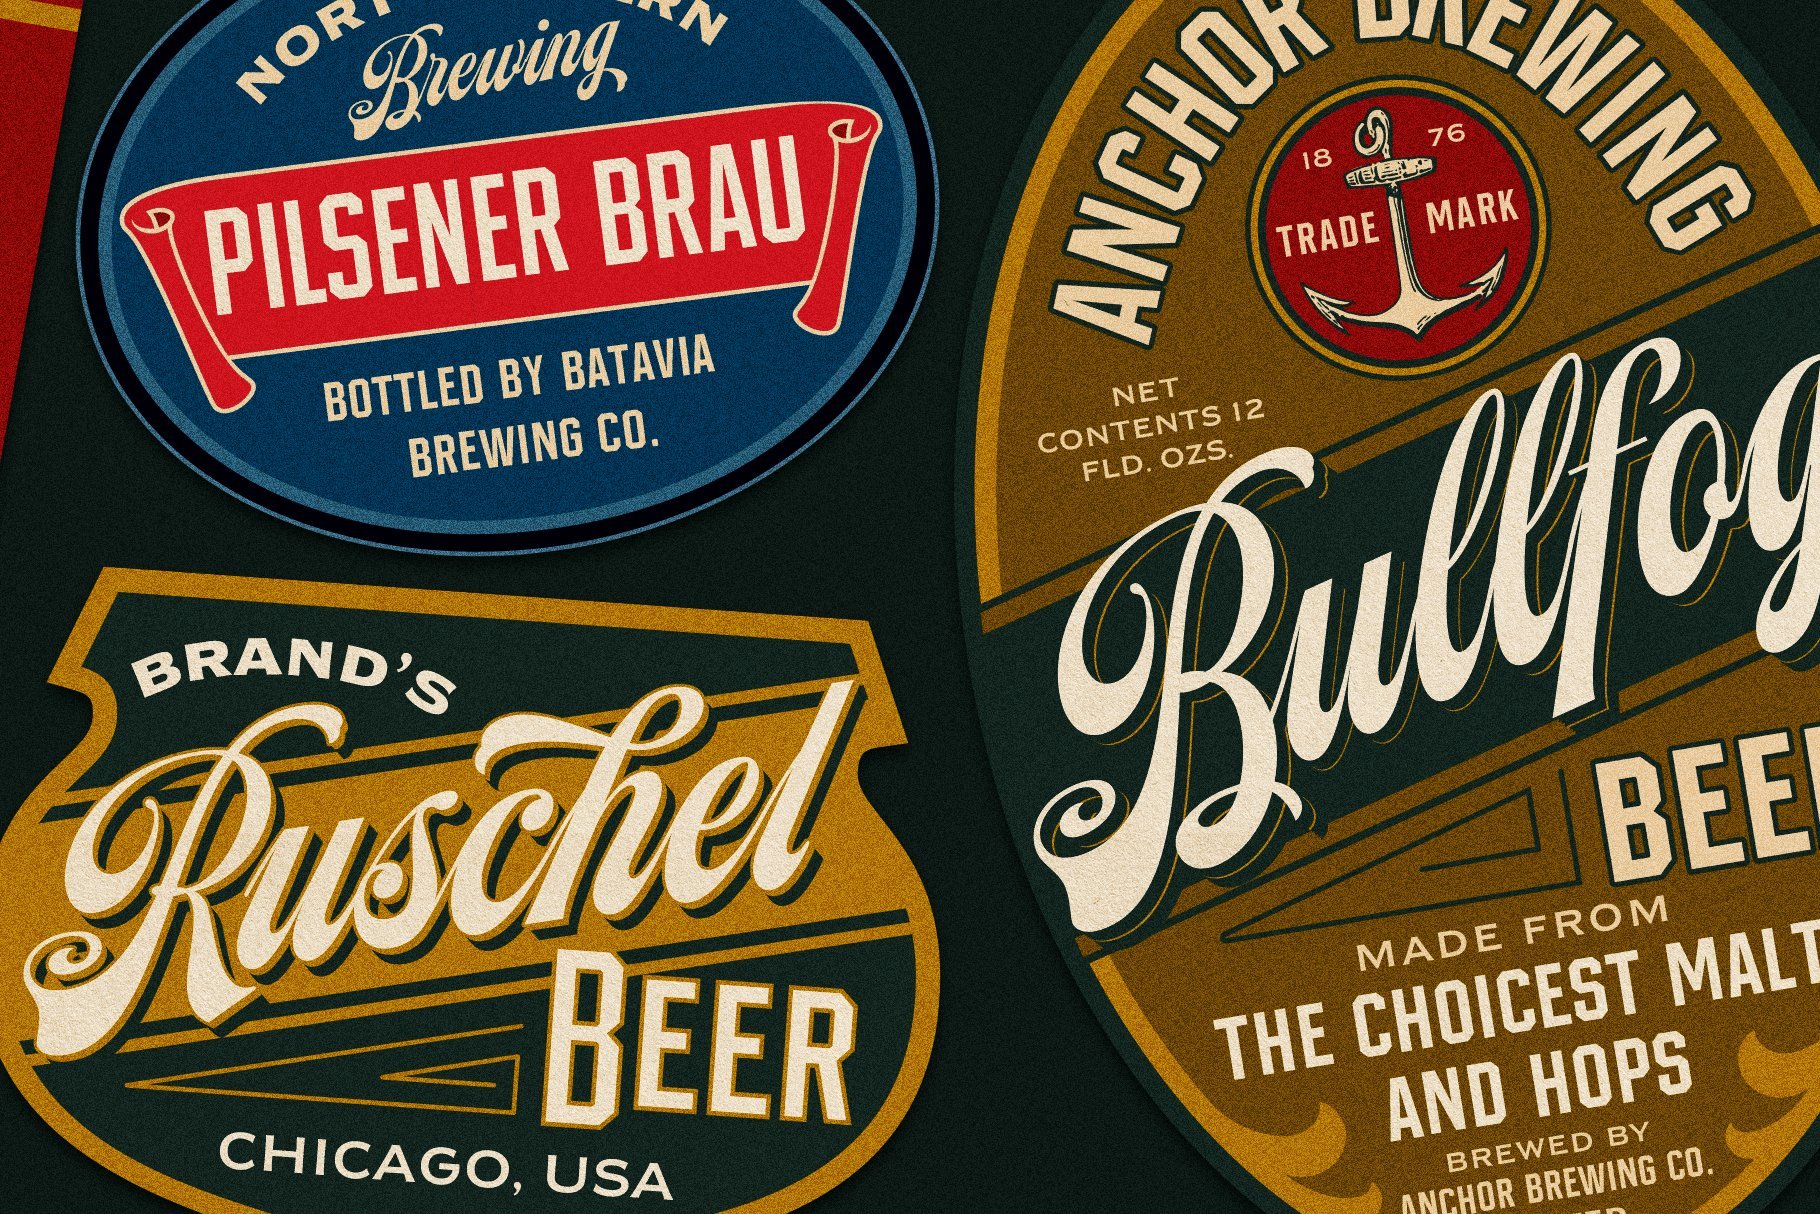 Moister Font Collections